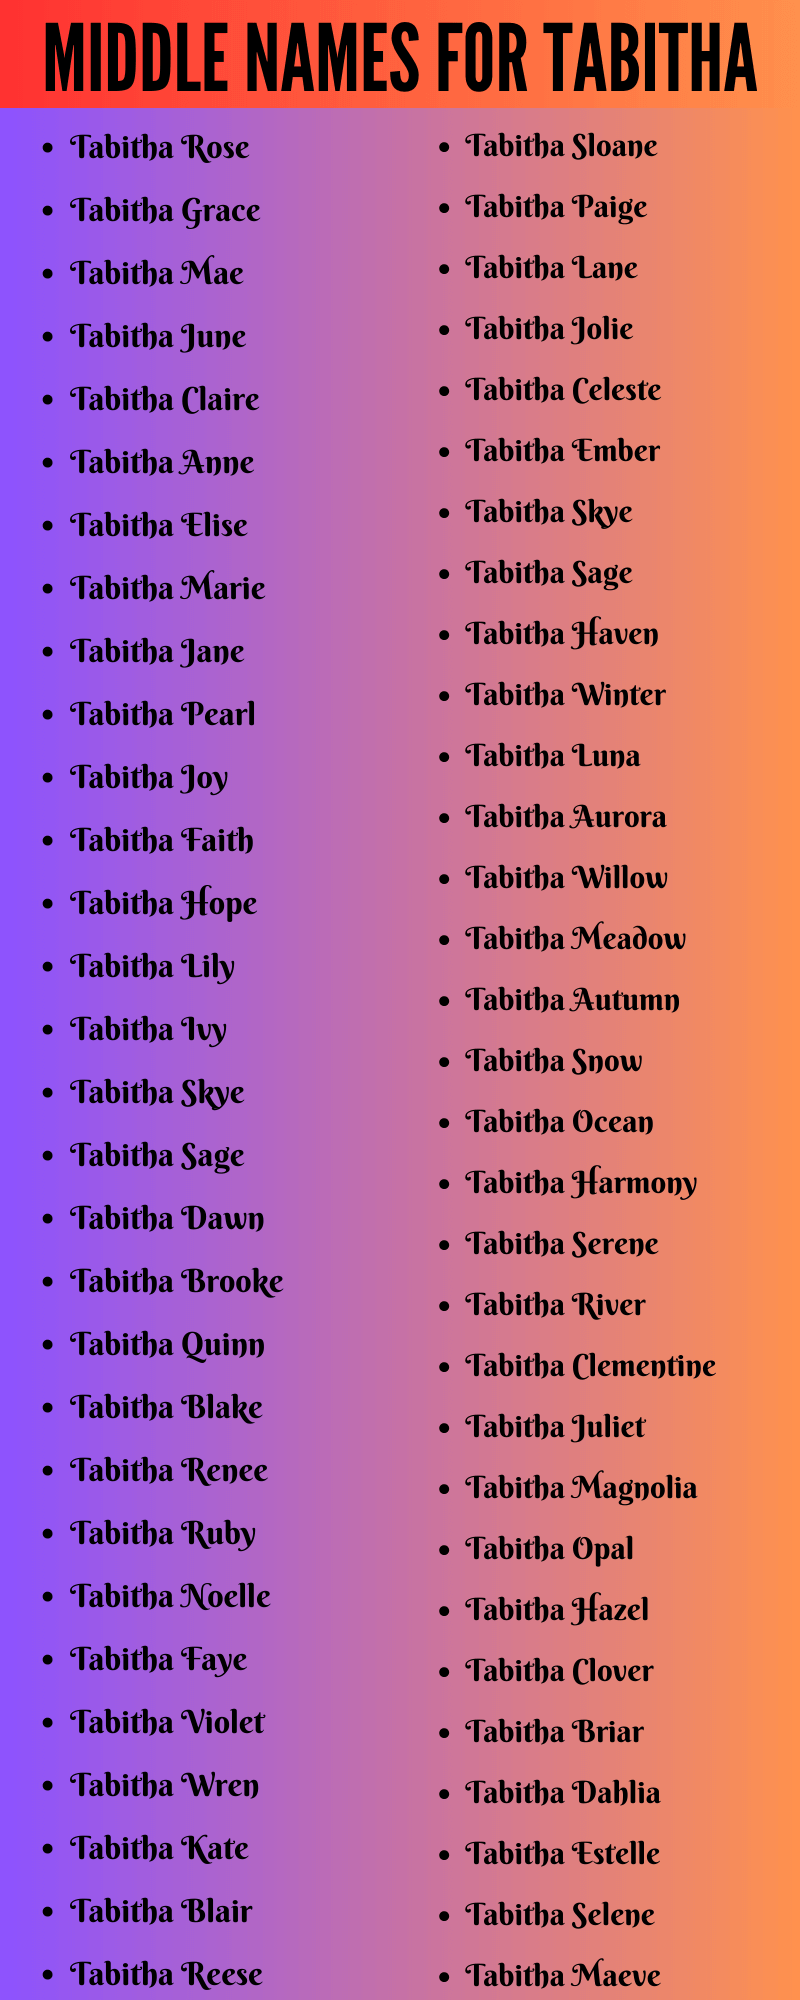 Middle Names For Tabitha